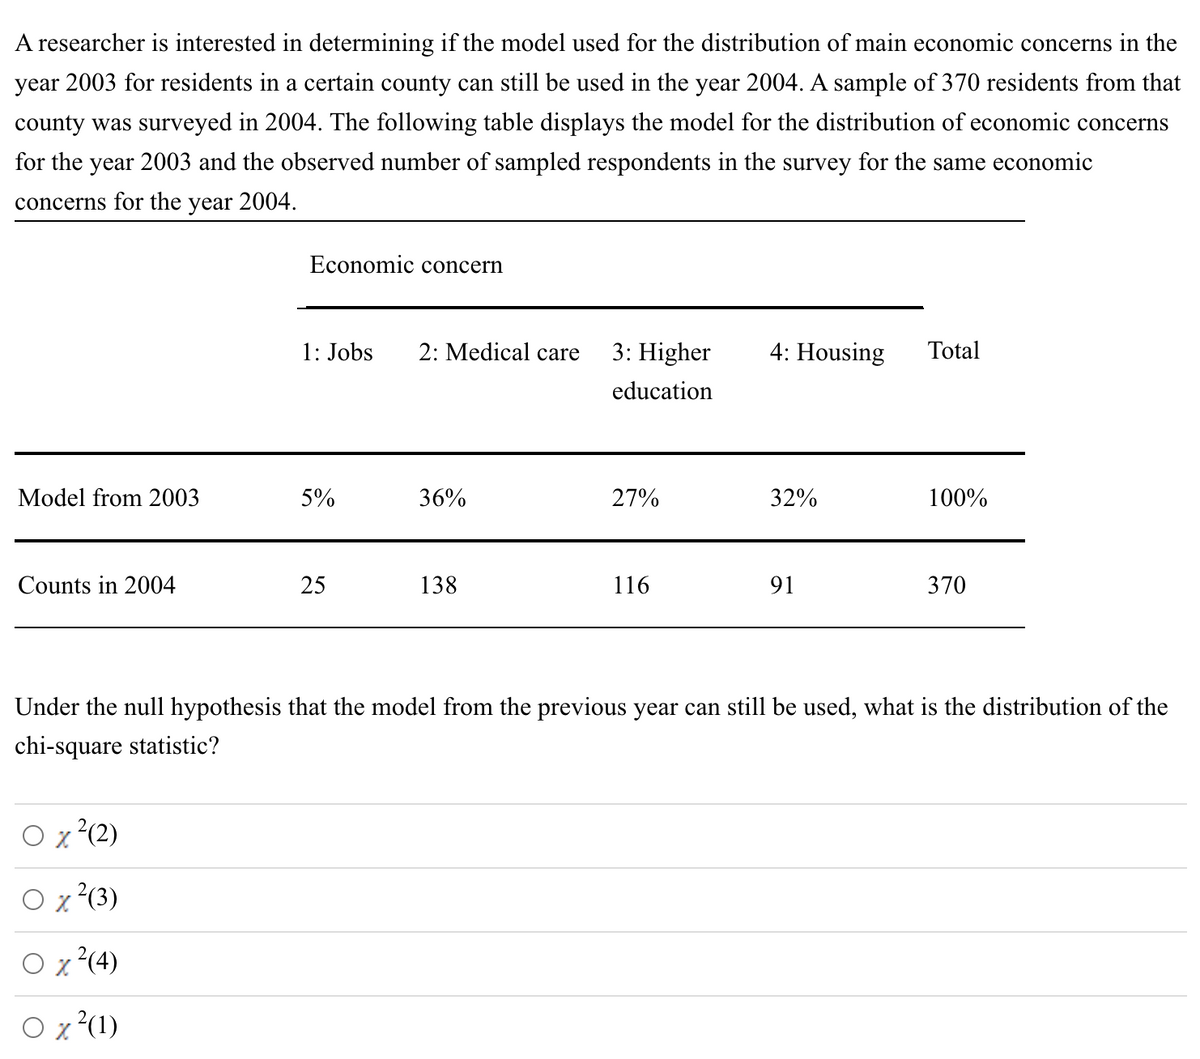 A researcher is interested in determining if the model used for the distribution of main economic concerns in the
year 2003 for residents in a certain county can still be used in the year 2004. A sample of 370 residents from that
county was surveyed in 2004. The following table displays the model for the distribution of economic concerns
for the year 2003 and the observed number of sampled respondents in the survey for the same economic
concerns for the year 2004.
Economic concern
1: Jobs
2: Medical care
4: Housing Total
3: Higher
education
Model from 2003
5%
36%
27%
32%
100%
Counts in 2004
25
138
116
91
370
Under the null hypothesis that the model from the previous year can still be used, what is the distribution of the
chi-square statistic?
○ x ²(2)
O x ²(3)
O x ²(4)
O x²(1)